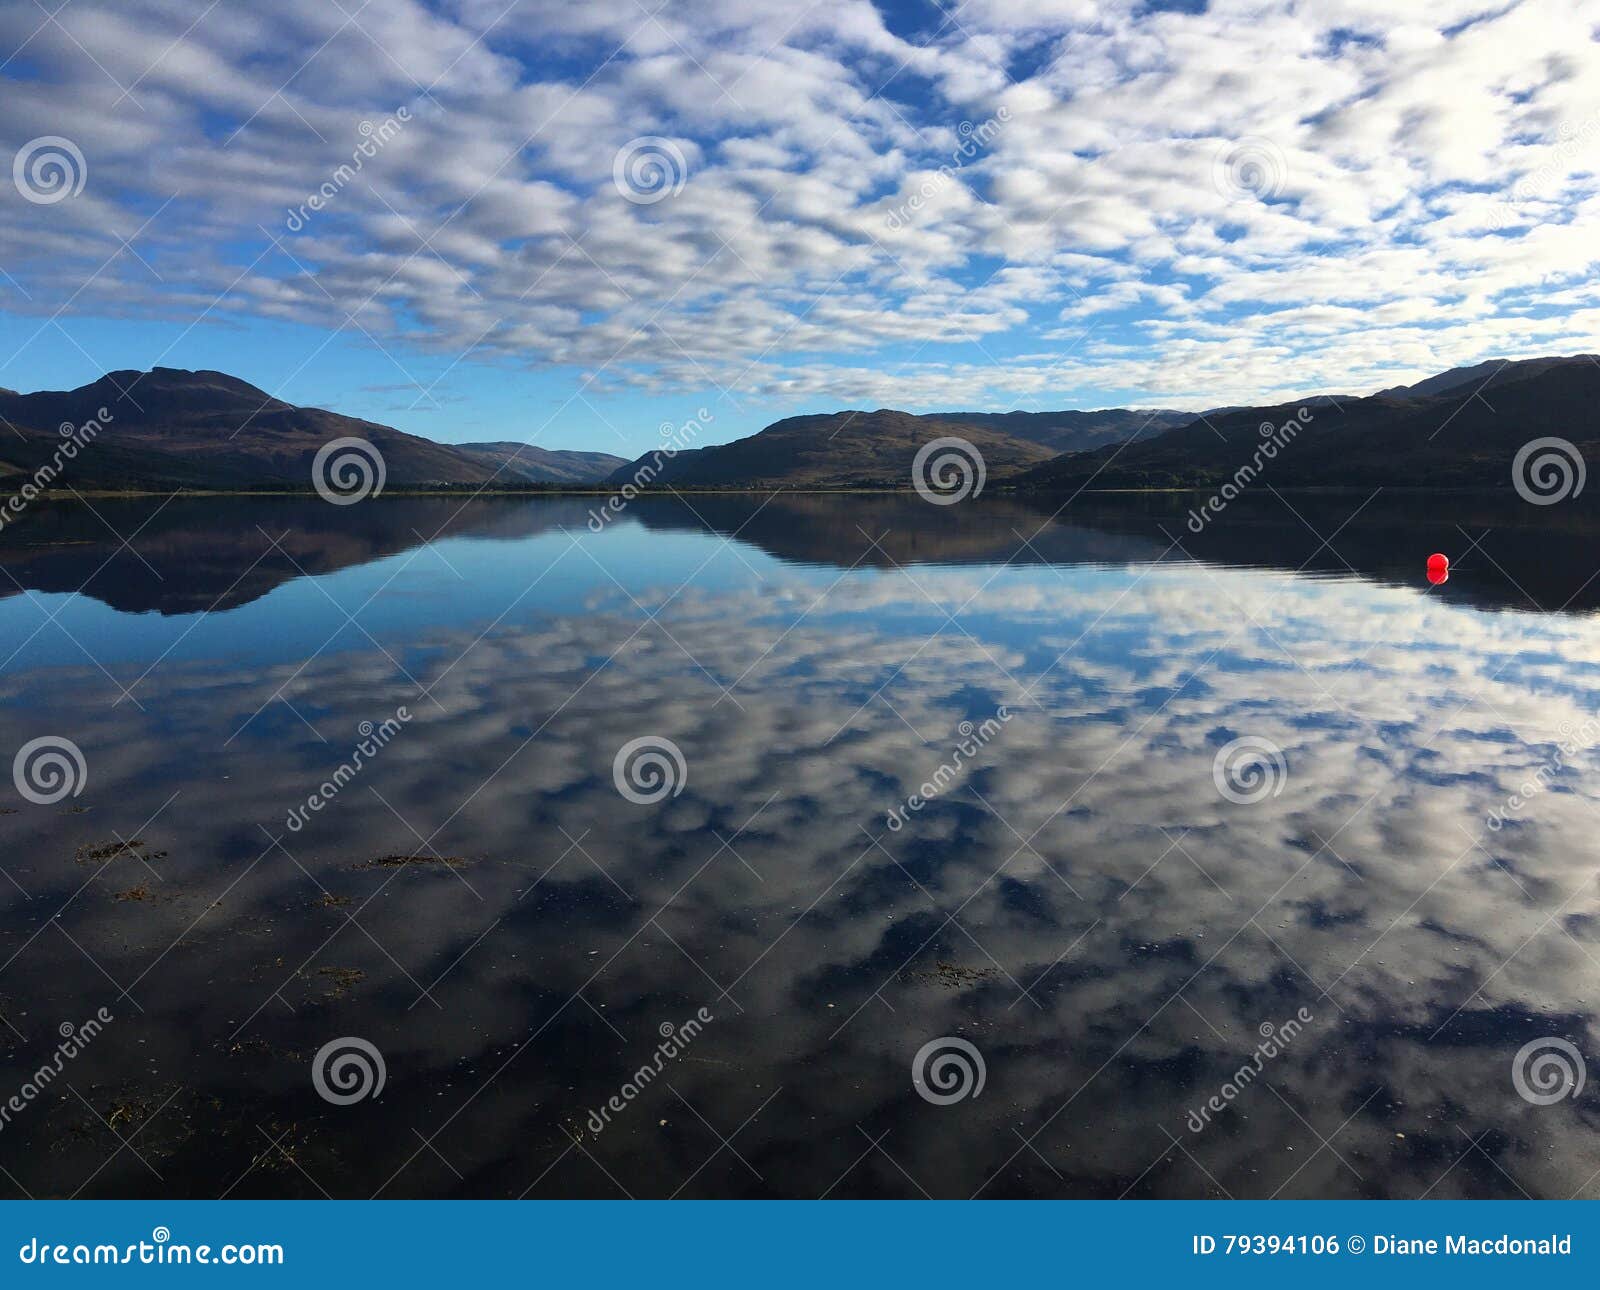 Red ball on Loch Carron stock photo. Image of ball, reflections - 79394106